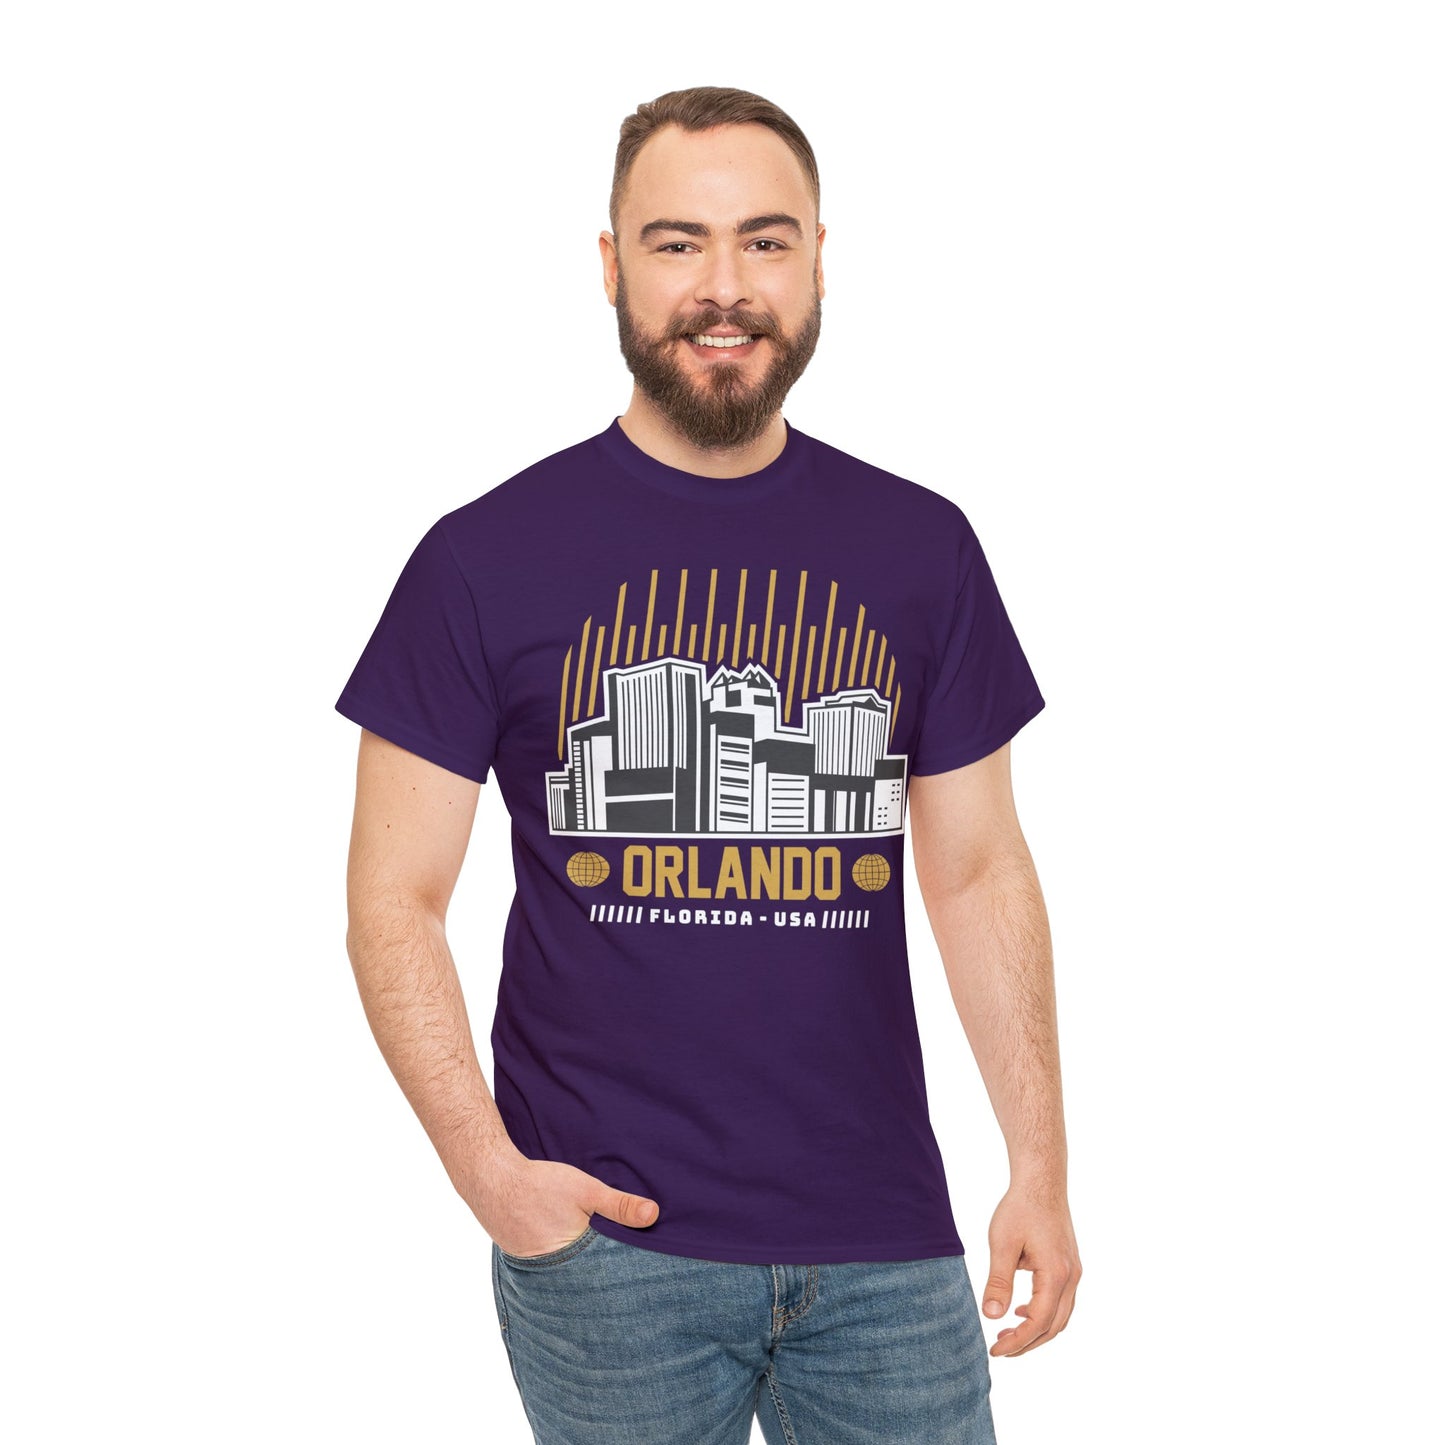 Discover Magic in Style with Our Orlando-Inspired T-Shirt